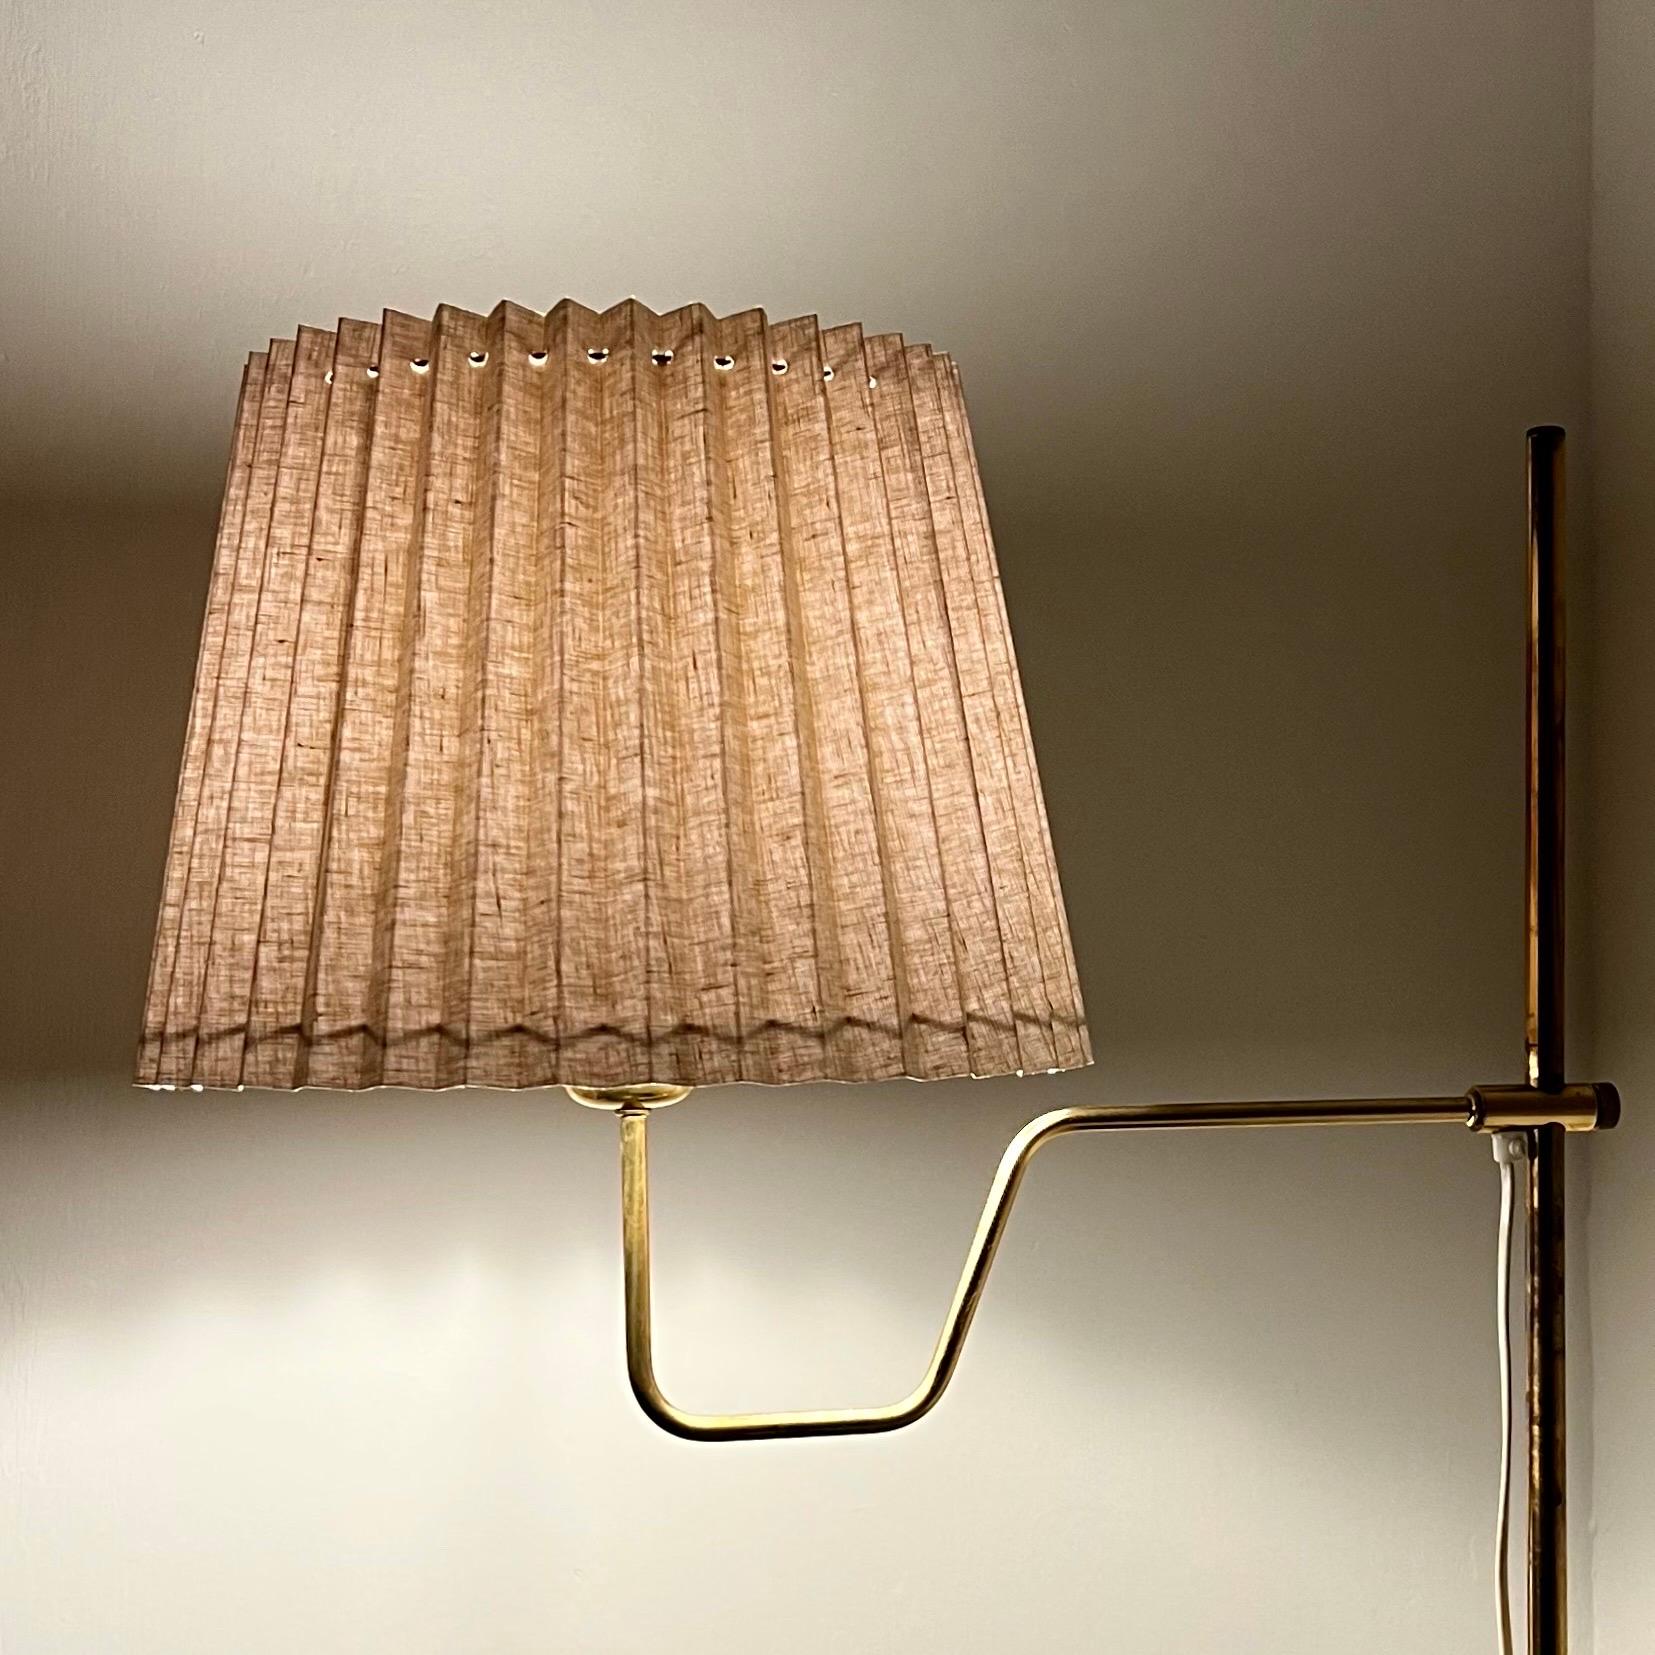 20th Century Pair of Brass Floor Lamps by Hans Agne Jakobsson, Sweden